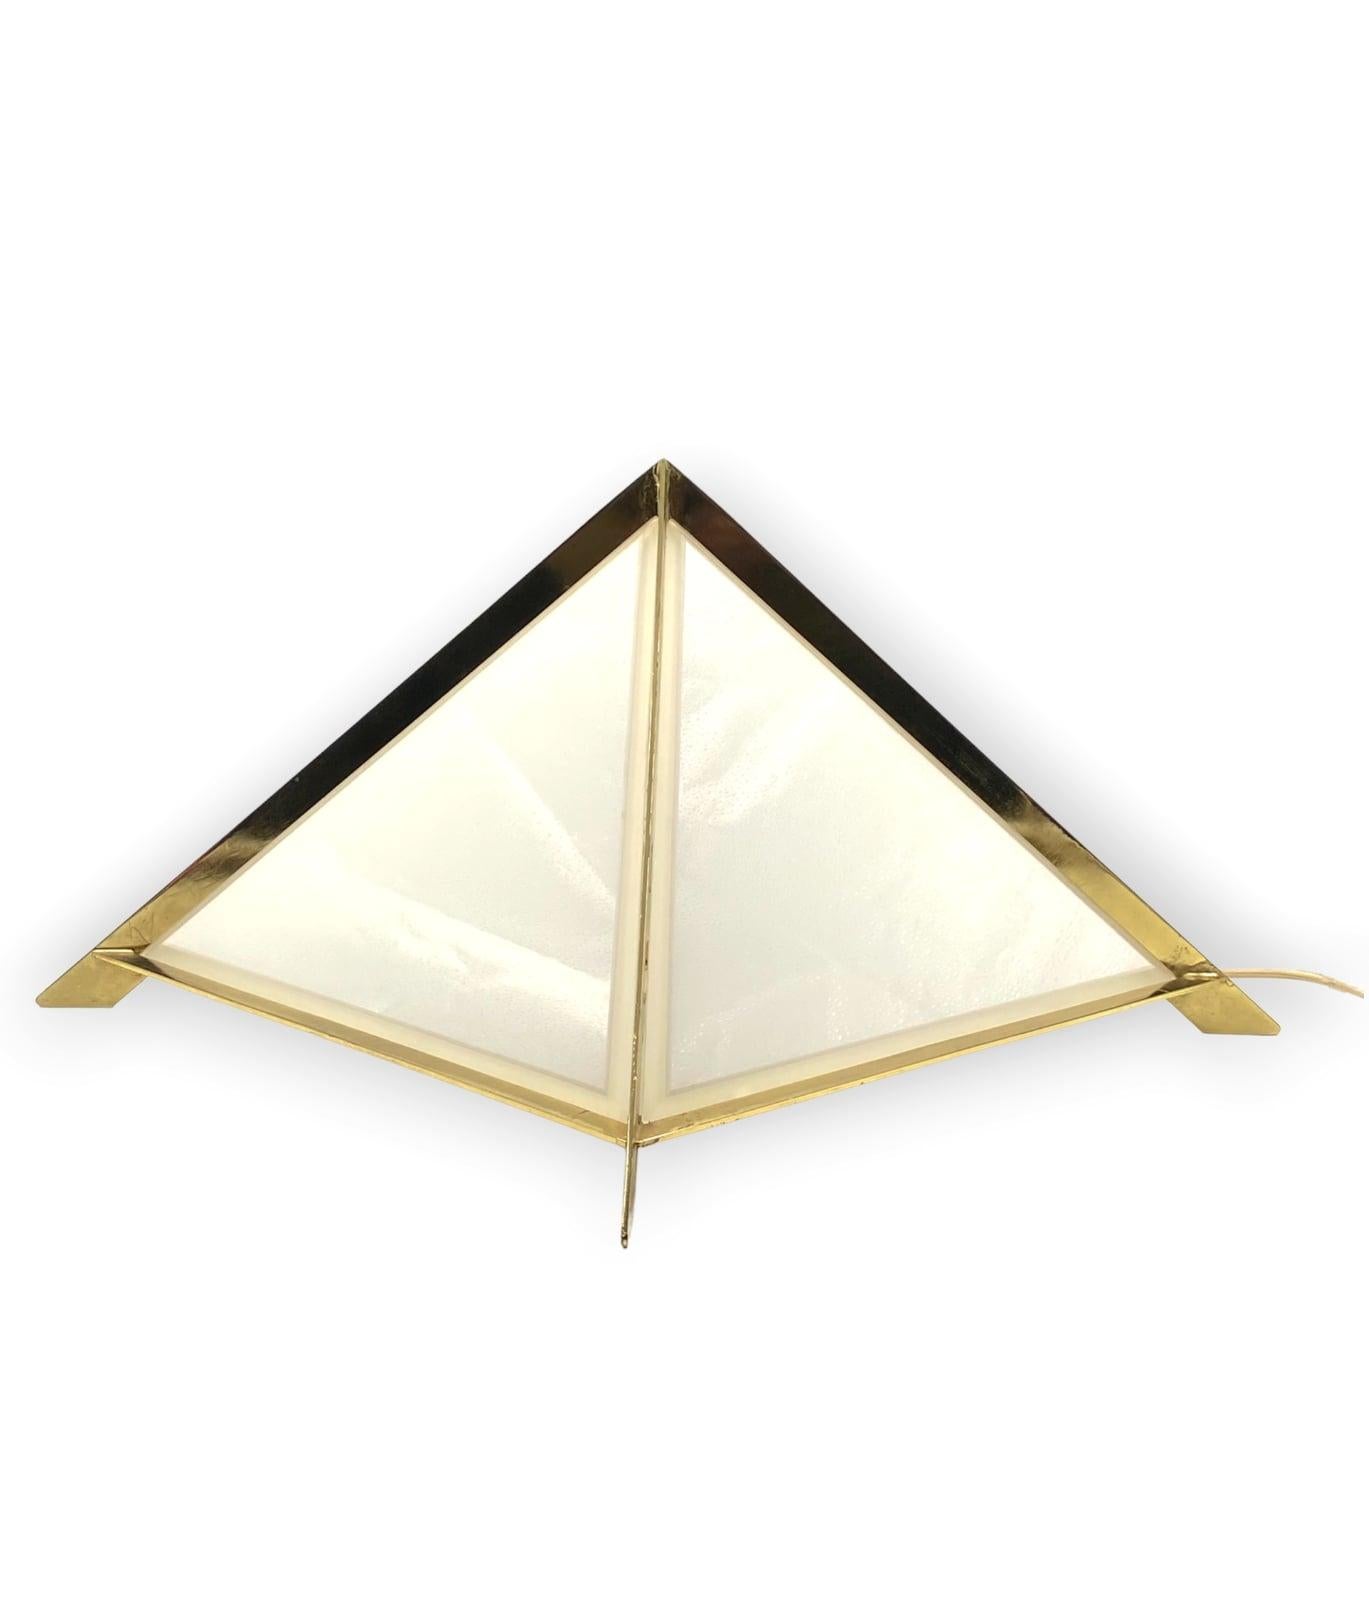 Golden Brass Pyramidal Table Lamp, Christos, Italy, 1970 For Sale 12